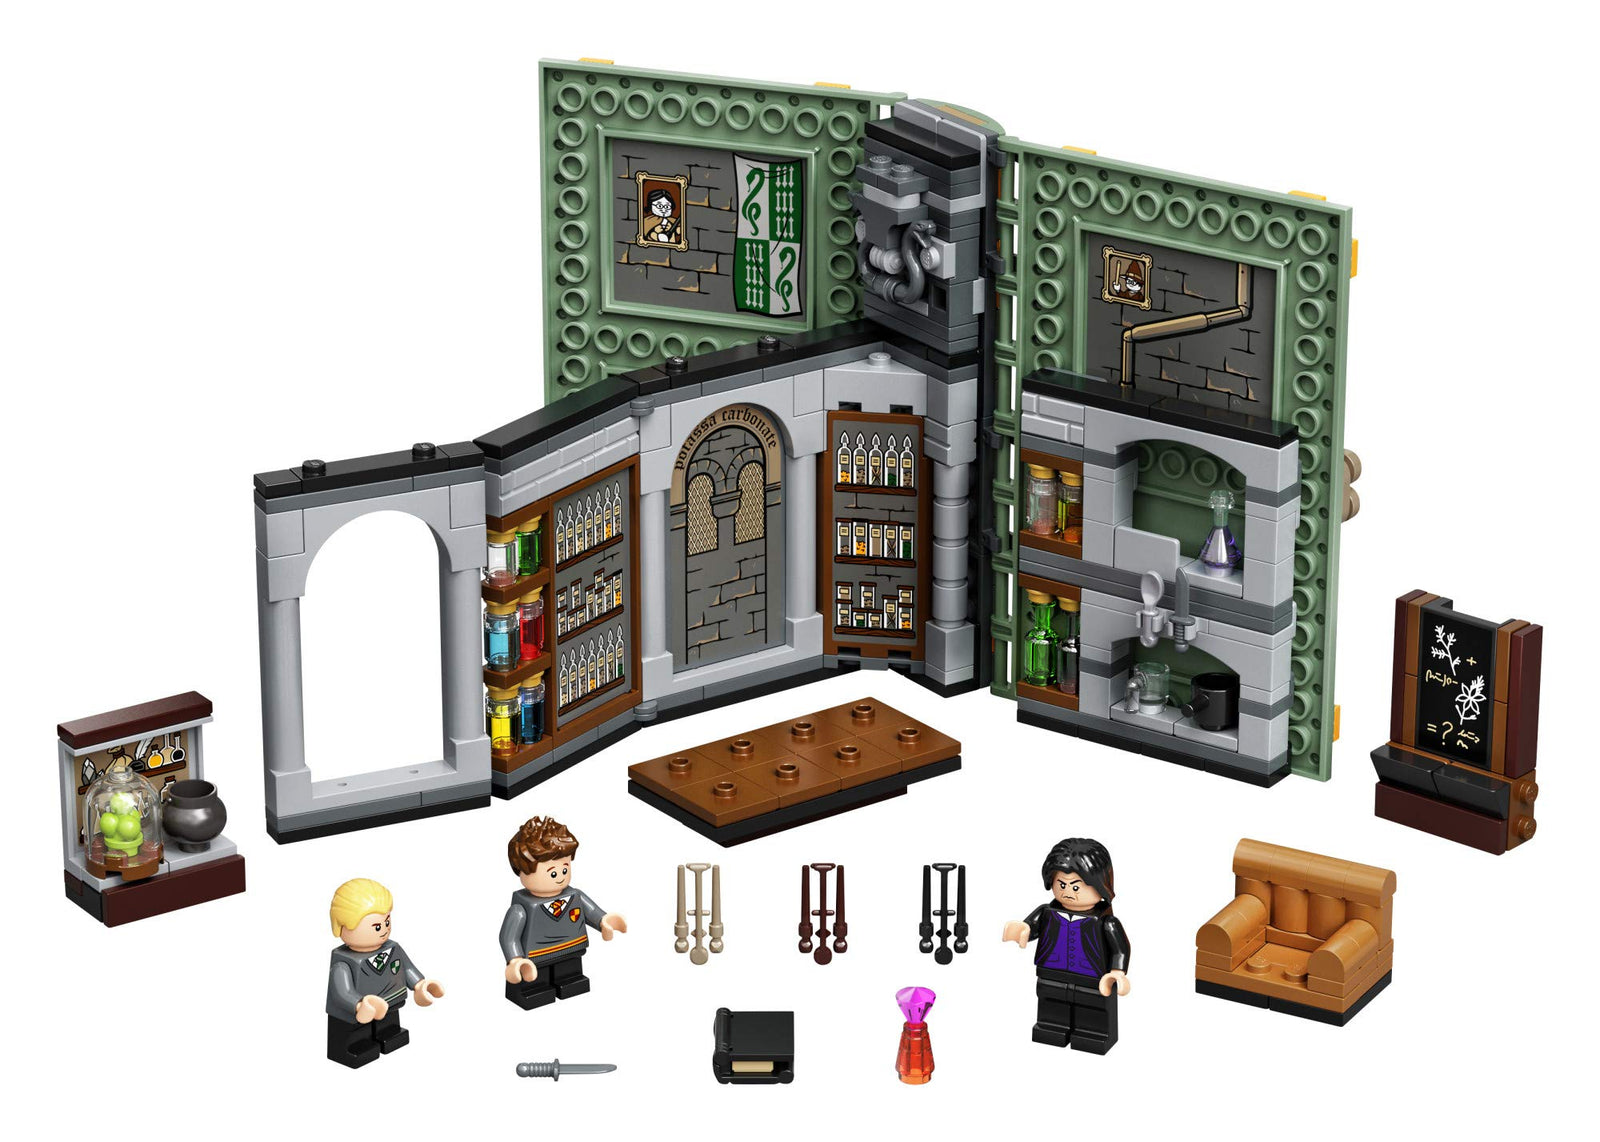 LEGO Harry Potter Hogwarts Moment: Potions Class 76383 Brick-Built Playset with Professor Snape’s Potions Class, New 2021 (270 Pieces)